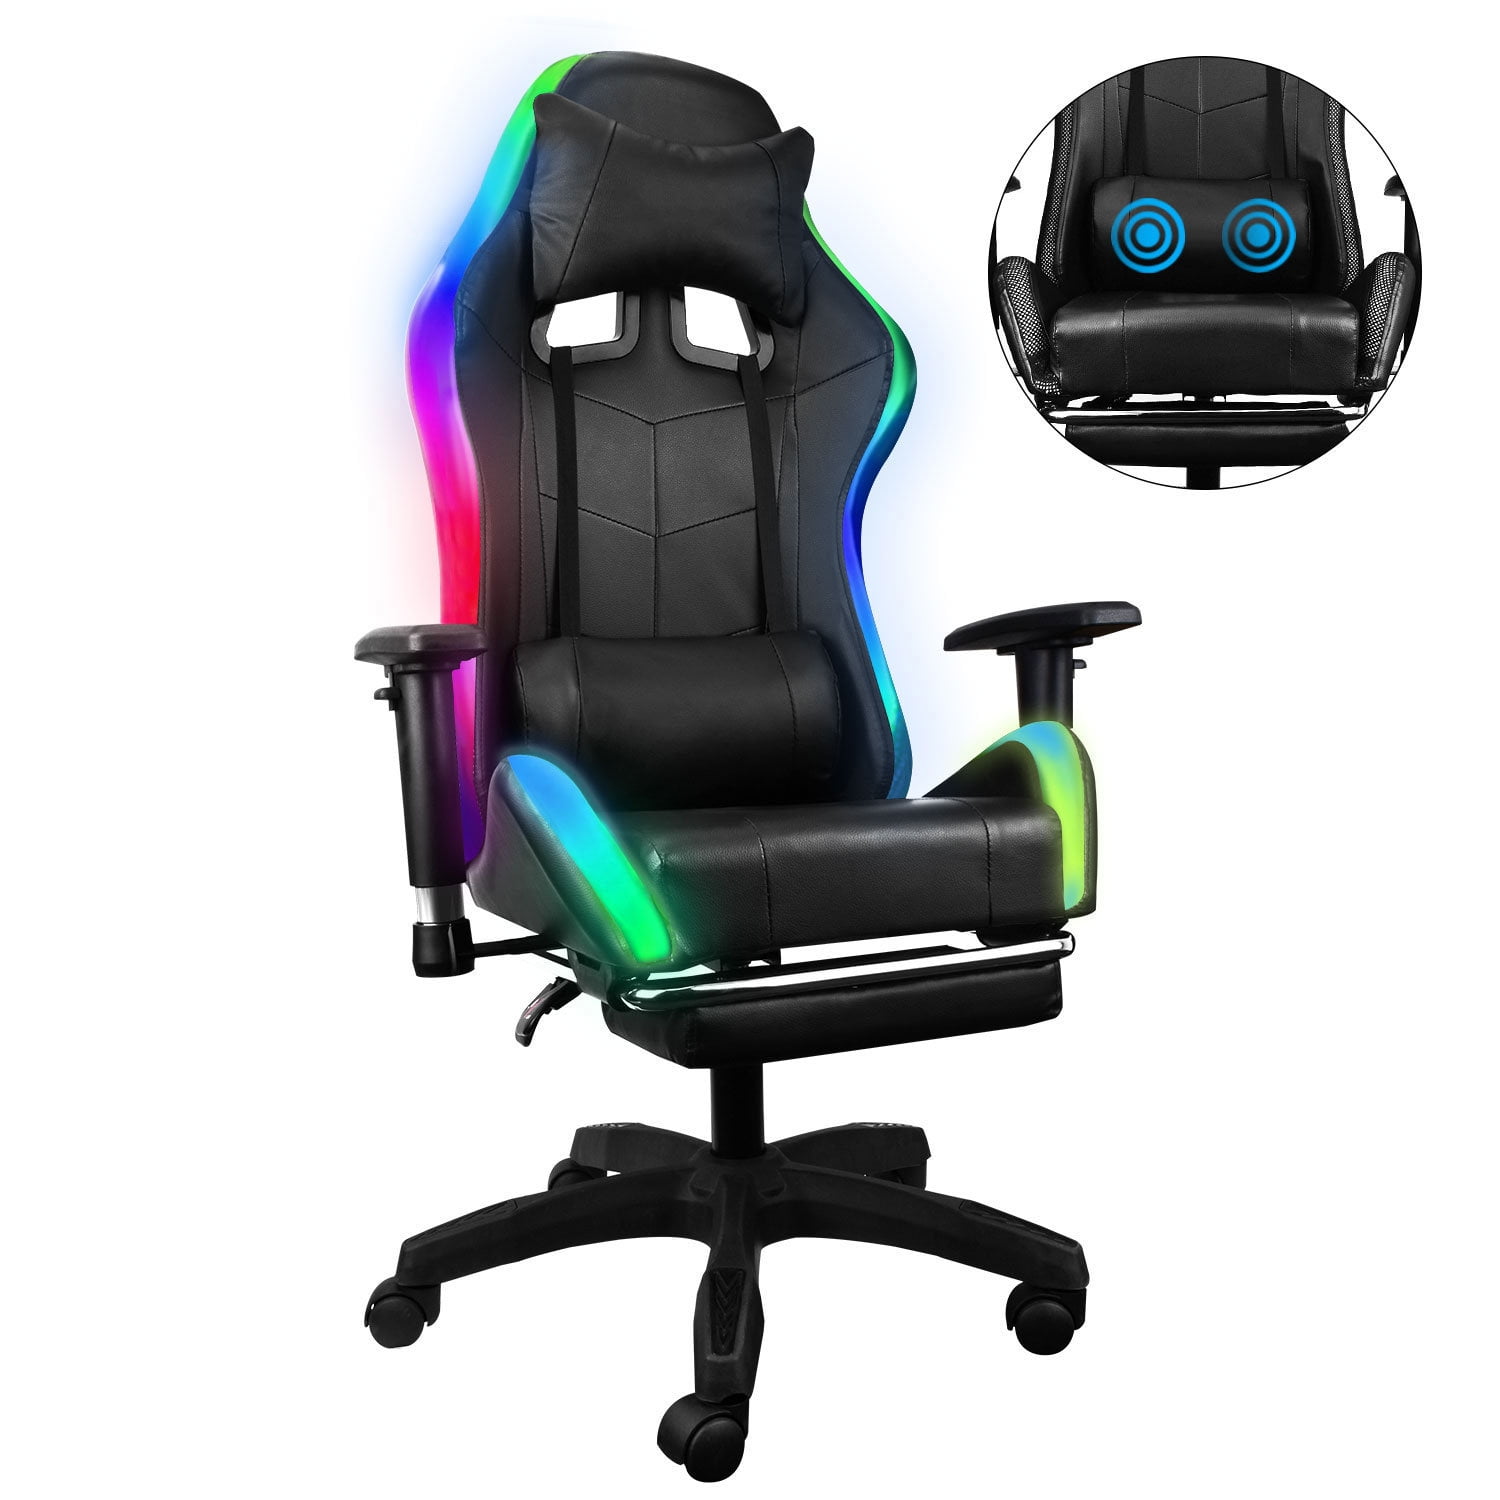 Gaming Chair with RGB LED Lights, Ergonomic Racing Style